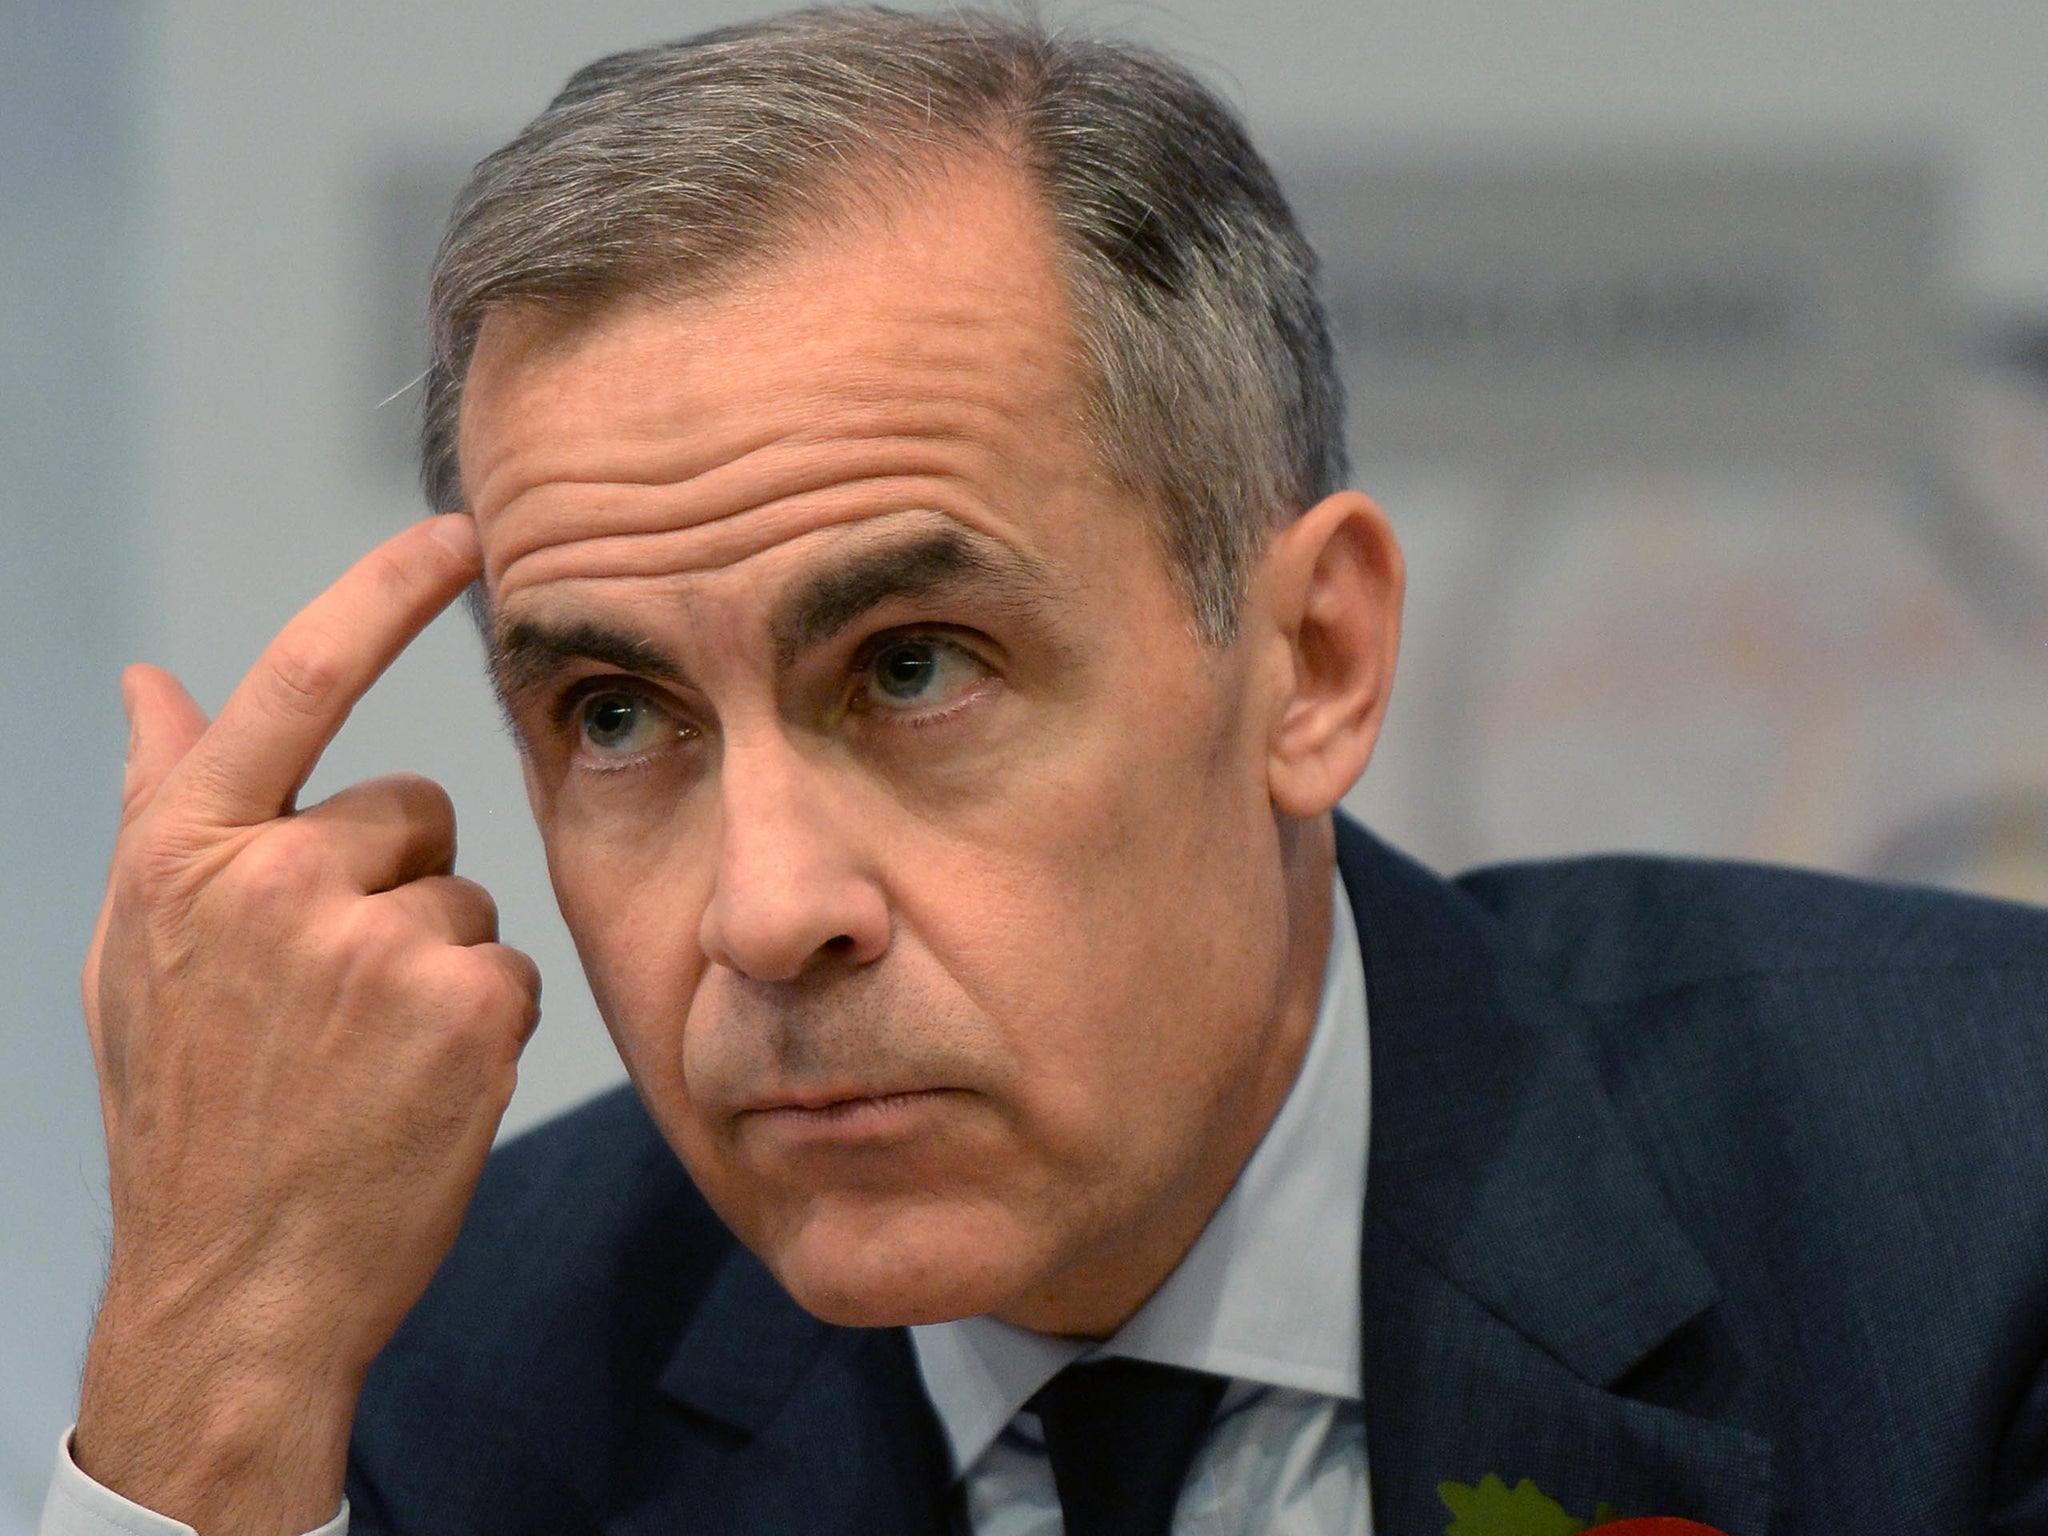 The Bank of England raised its main interest rate for the first time since 2007